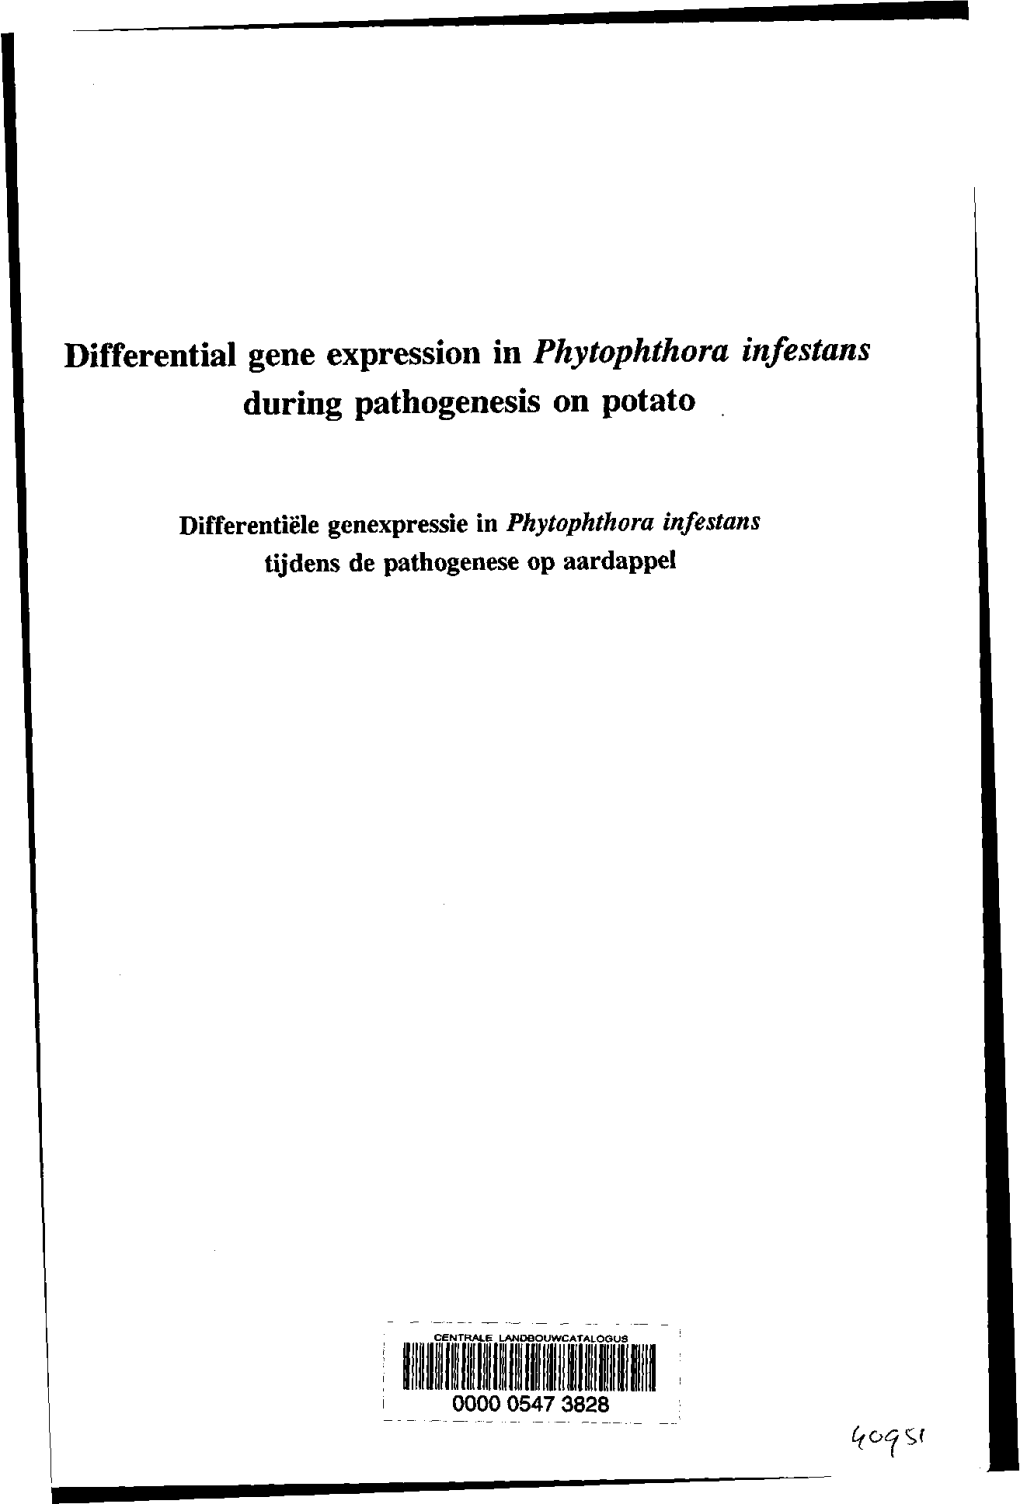 Differential Gene Expression Inphytophthora Infestans During Pathogenesis on Potato